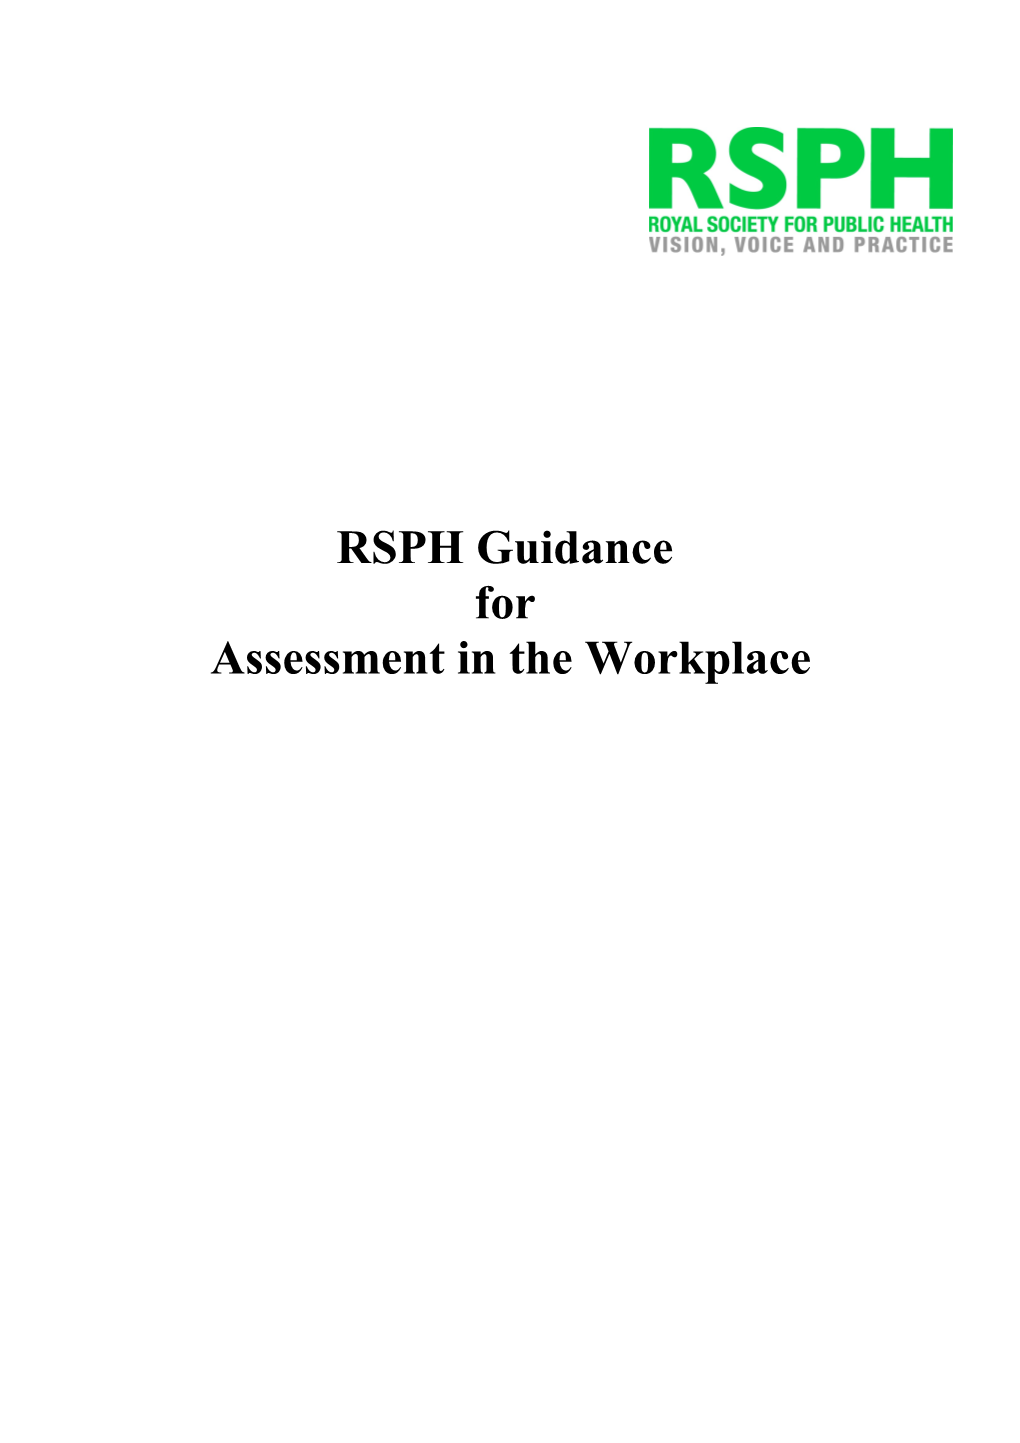 RSPH Guidance for Assessment in the Workplace